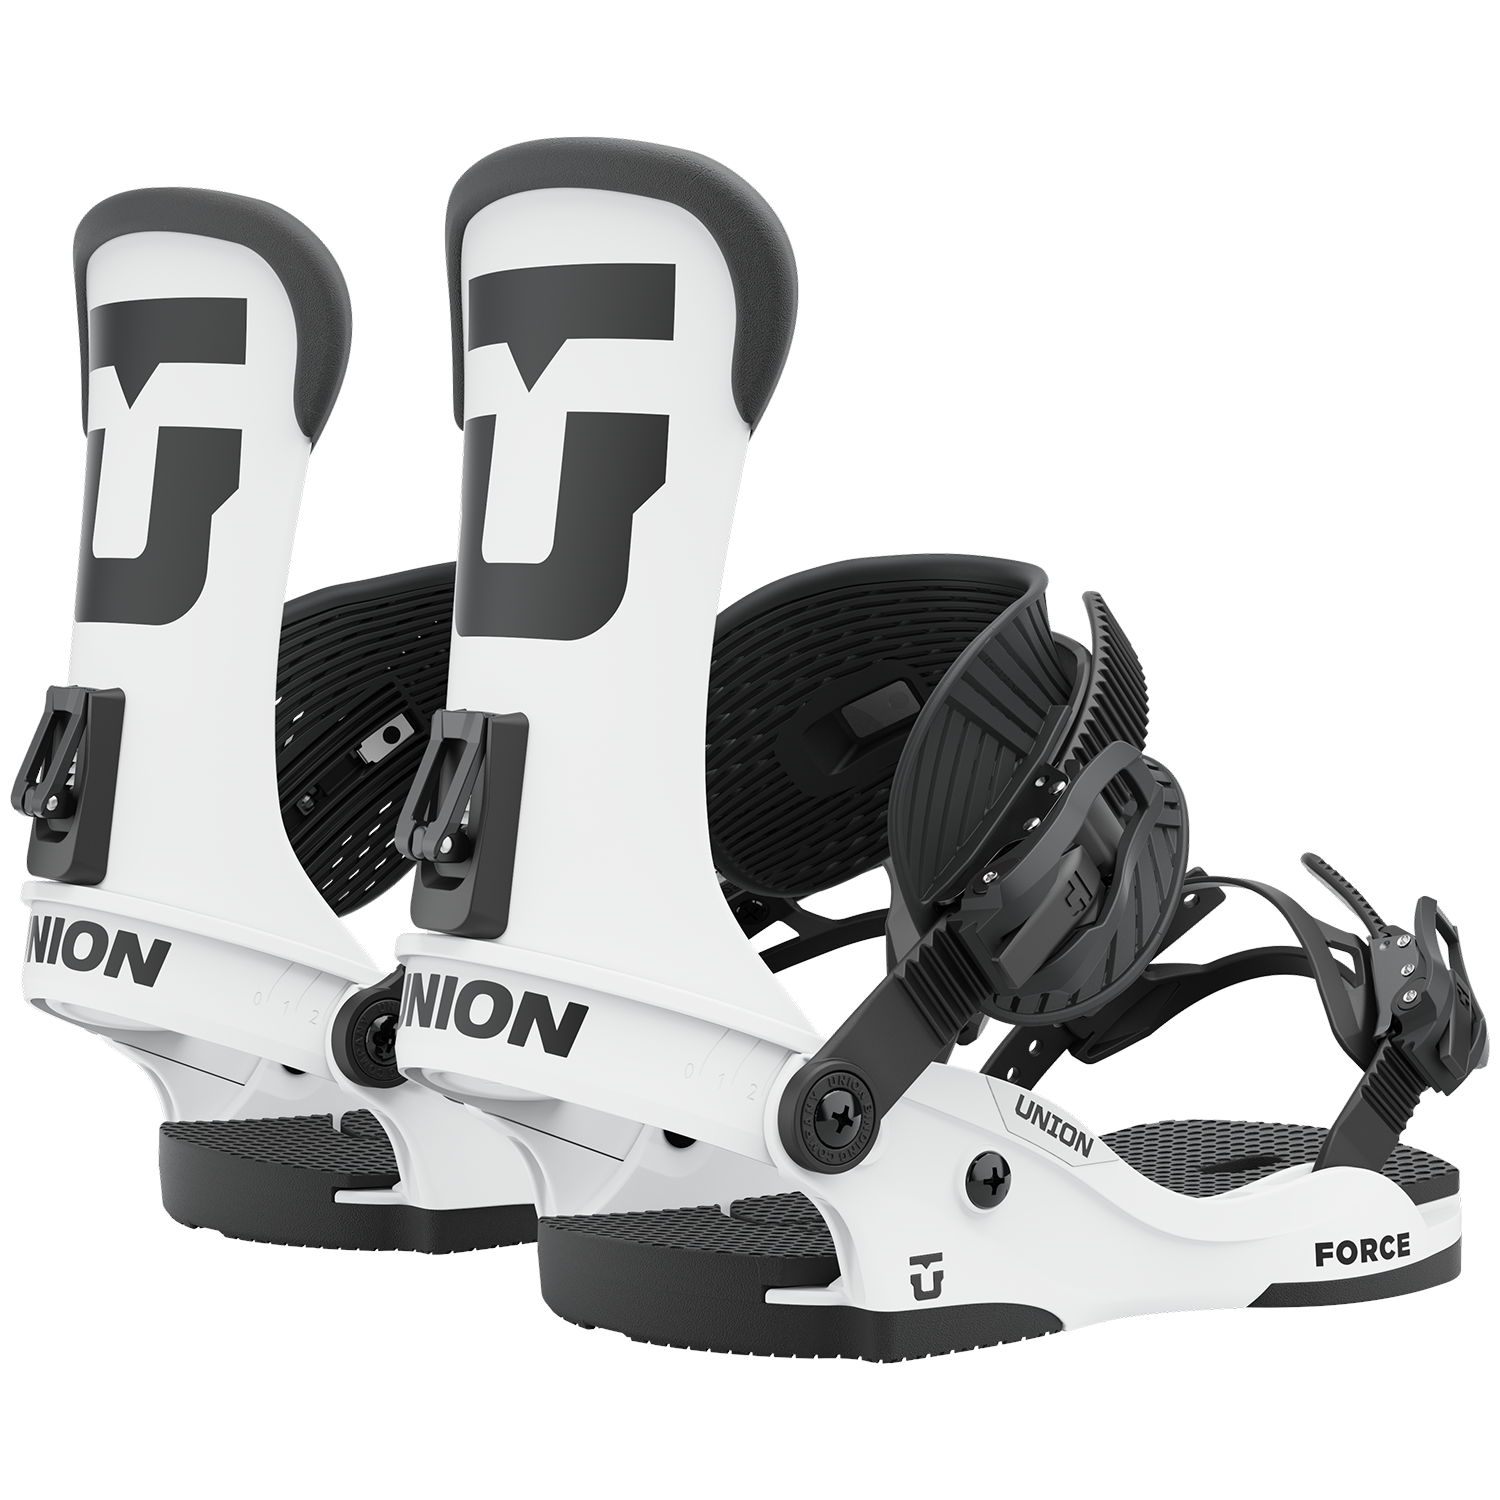 Details about   Union Force Team HB Snowboard Bindings New 2022 